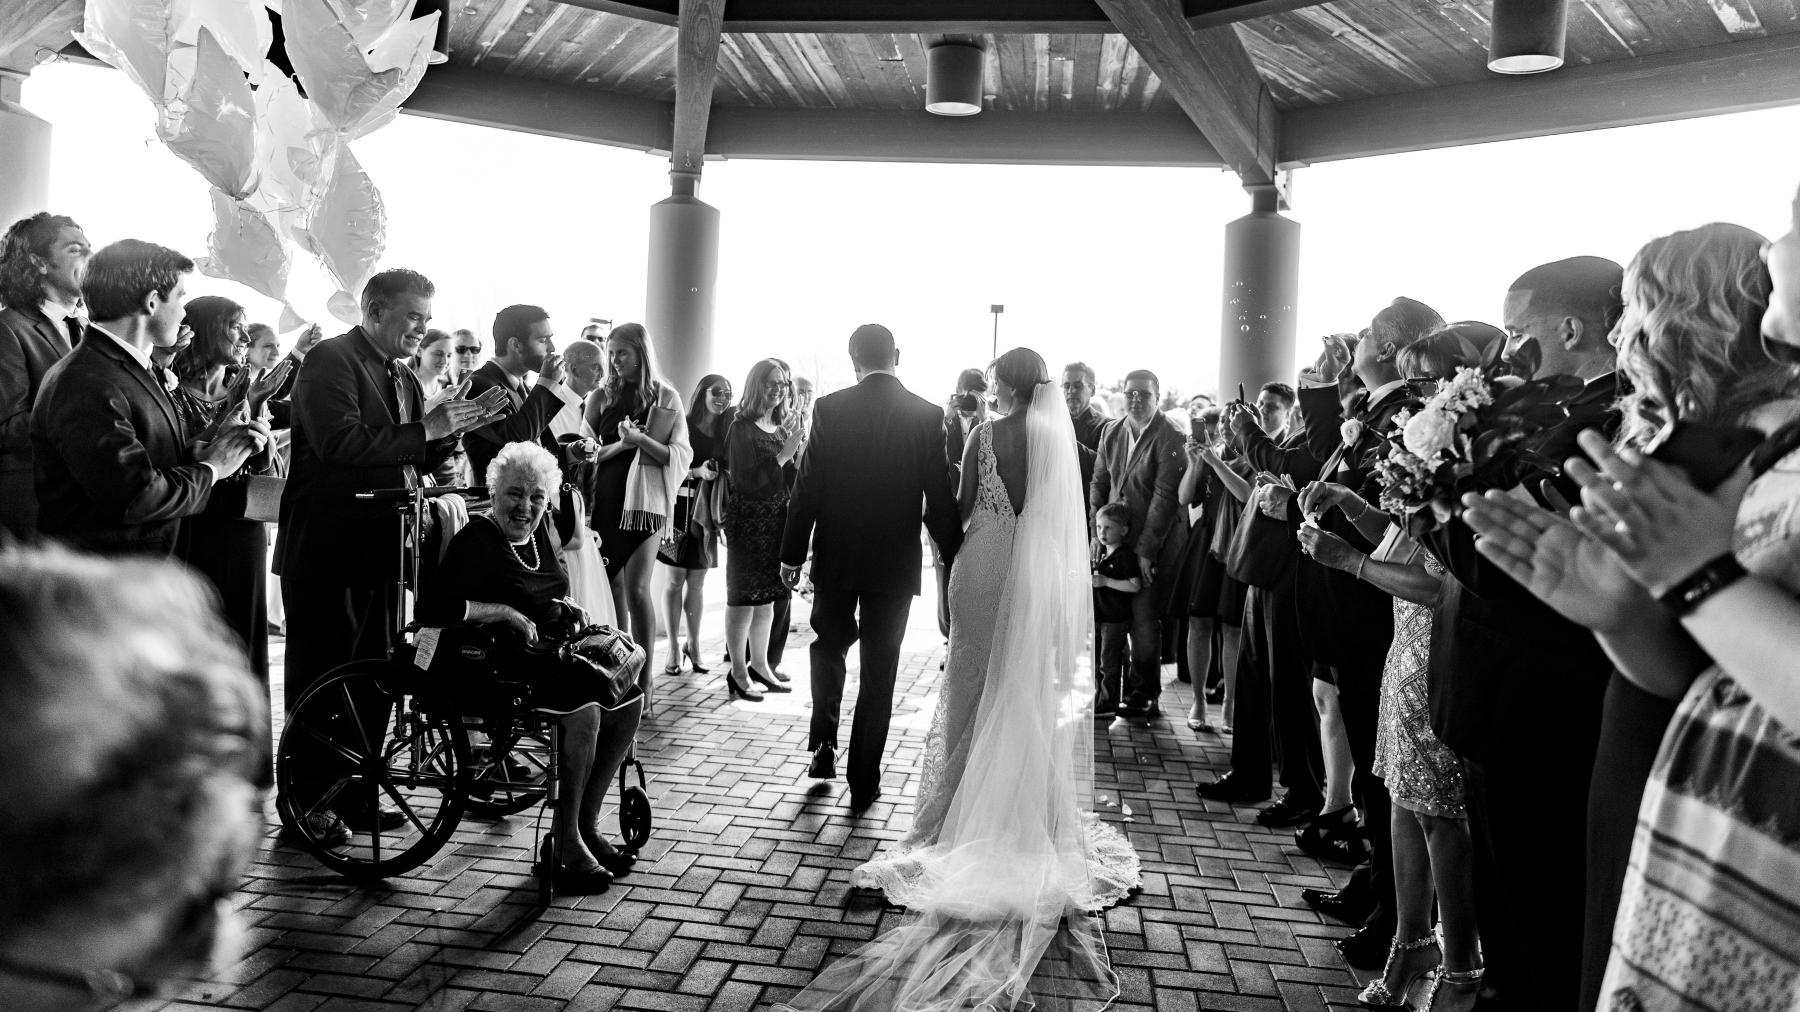  Scenes from Chris and Christina's New Jersey Wedding at Windows On the Water at Surfrider Beach Club. With an emphasis on modern, creative, natural light storytelling, each image is meant to tell a part of Chris and Christina's Day. Work was done wh